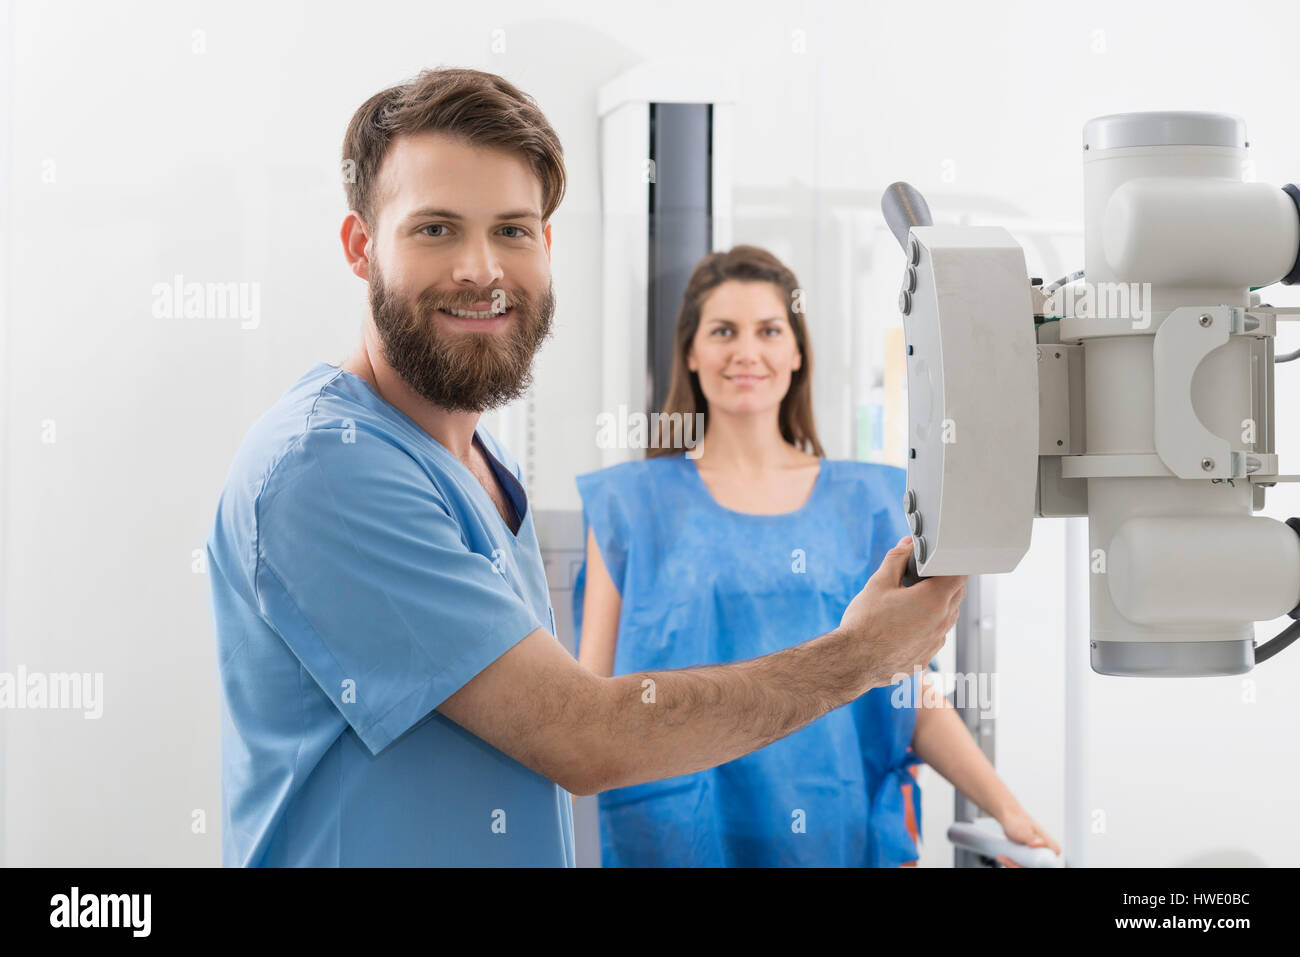 Radiologist Adjusting X-ray Machine Over Female Patient In Hospi Stock Photo